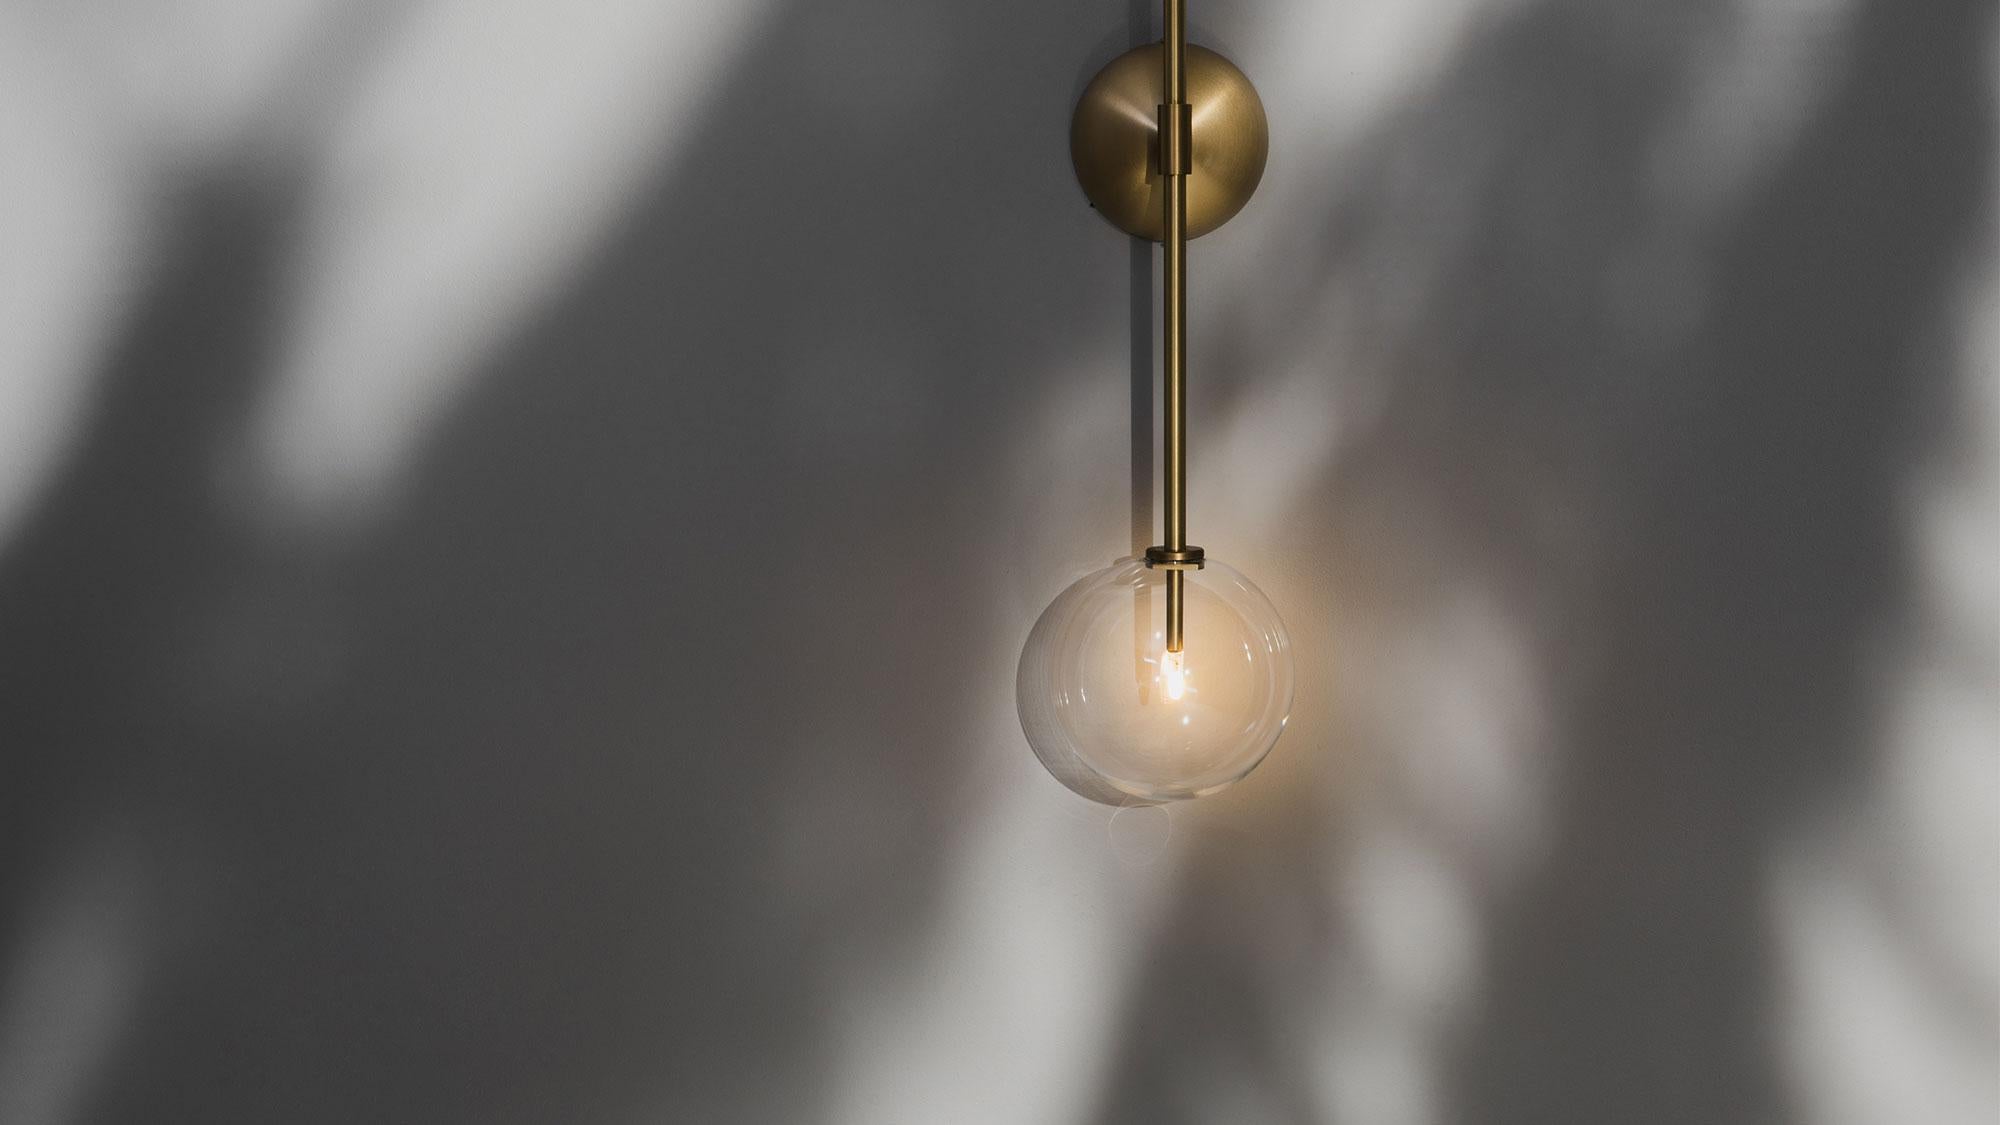 Two glass globes balance on either end of a single vertical arm, poised upon a conical brass mount. This stylish linear composition creates a balanced and minimalist impression.

Available in our three signature finishes: Lacquered Burnished Brass